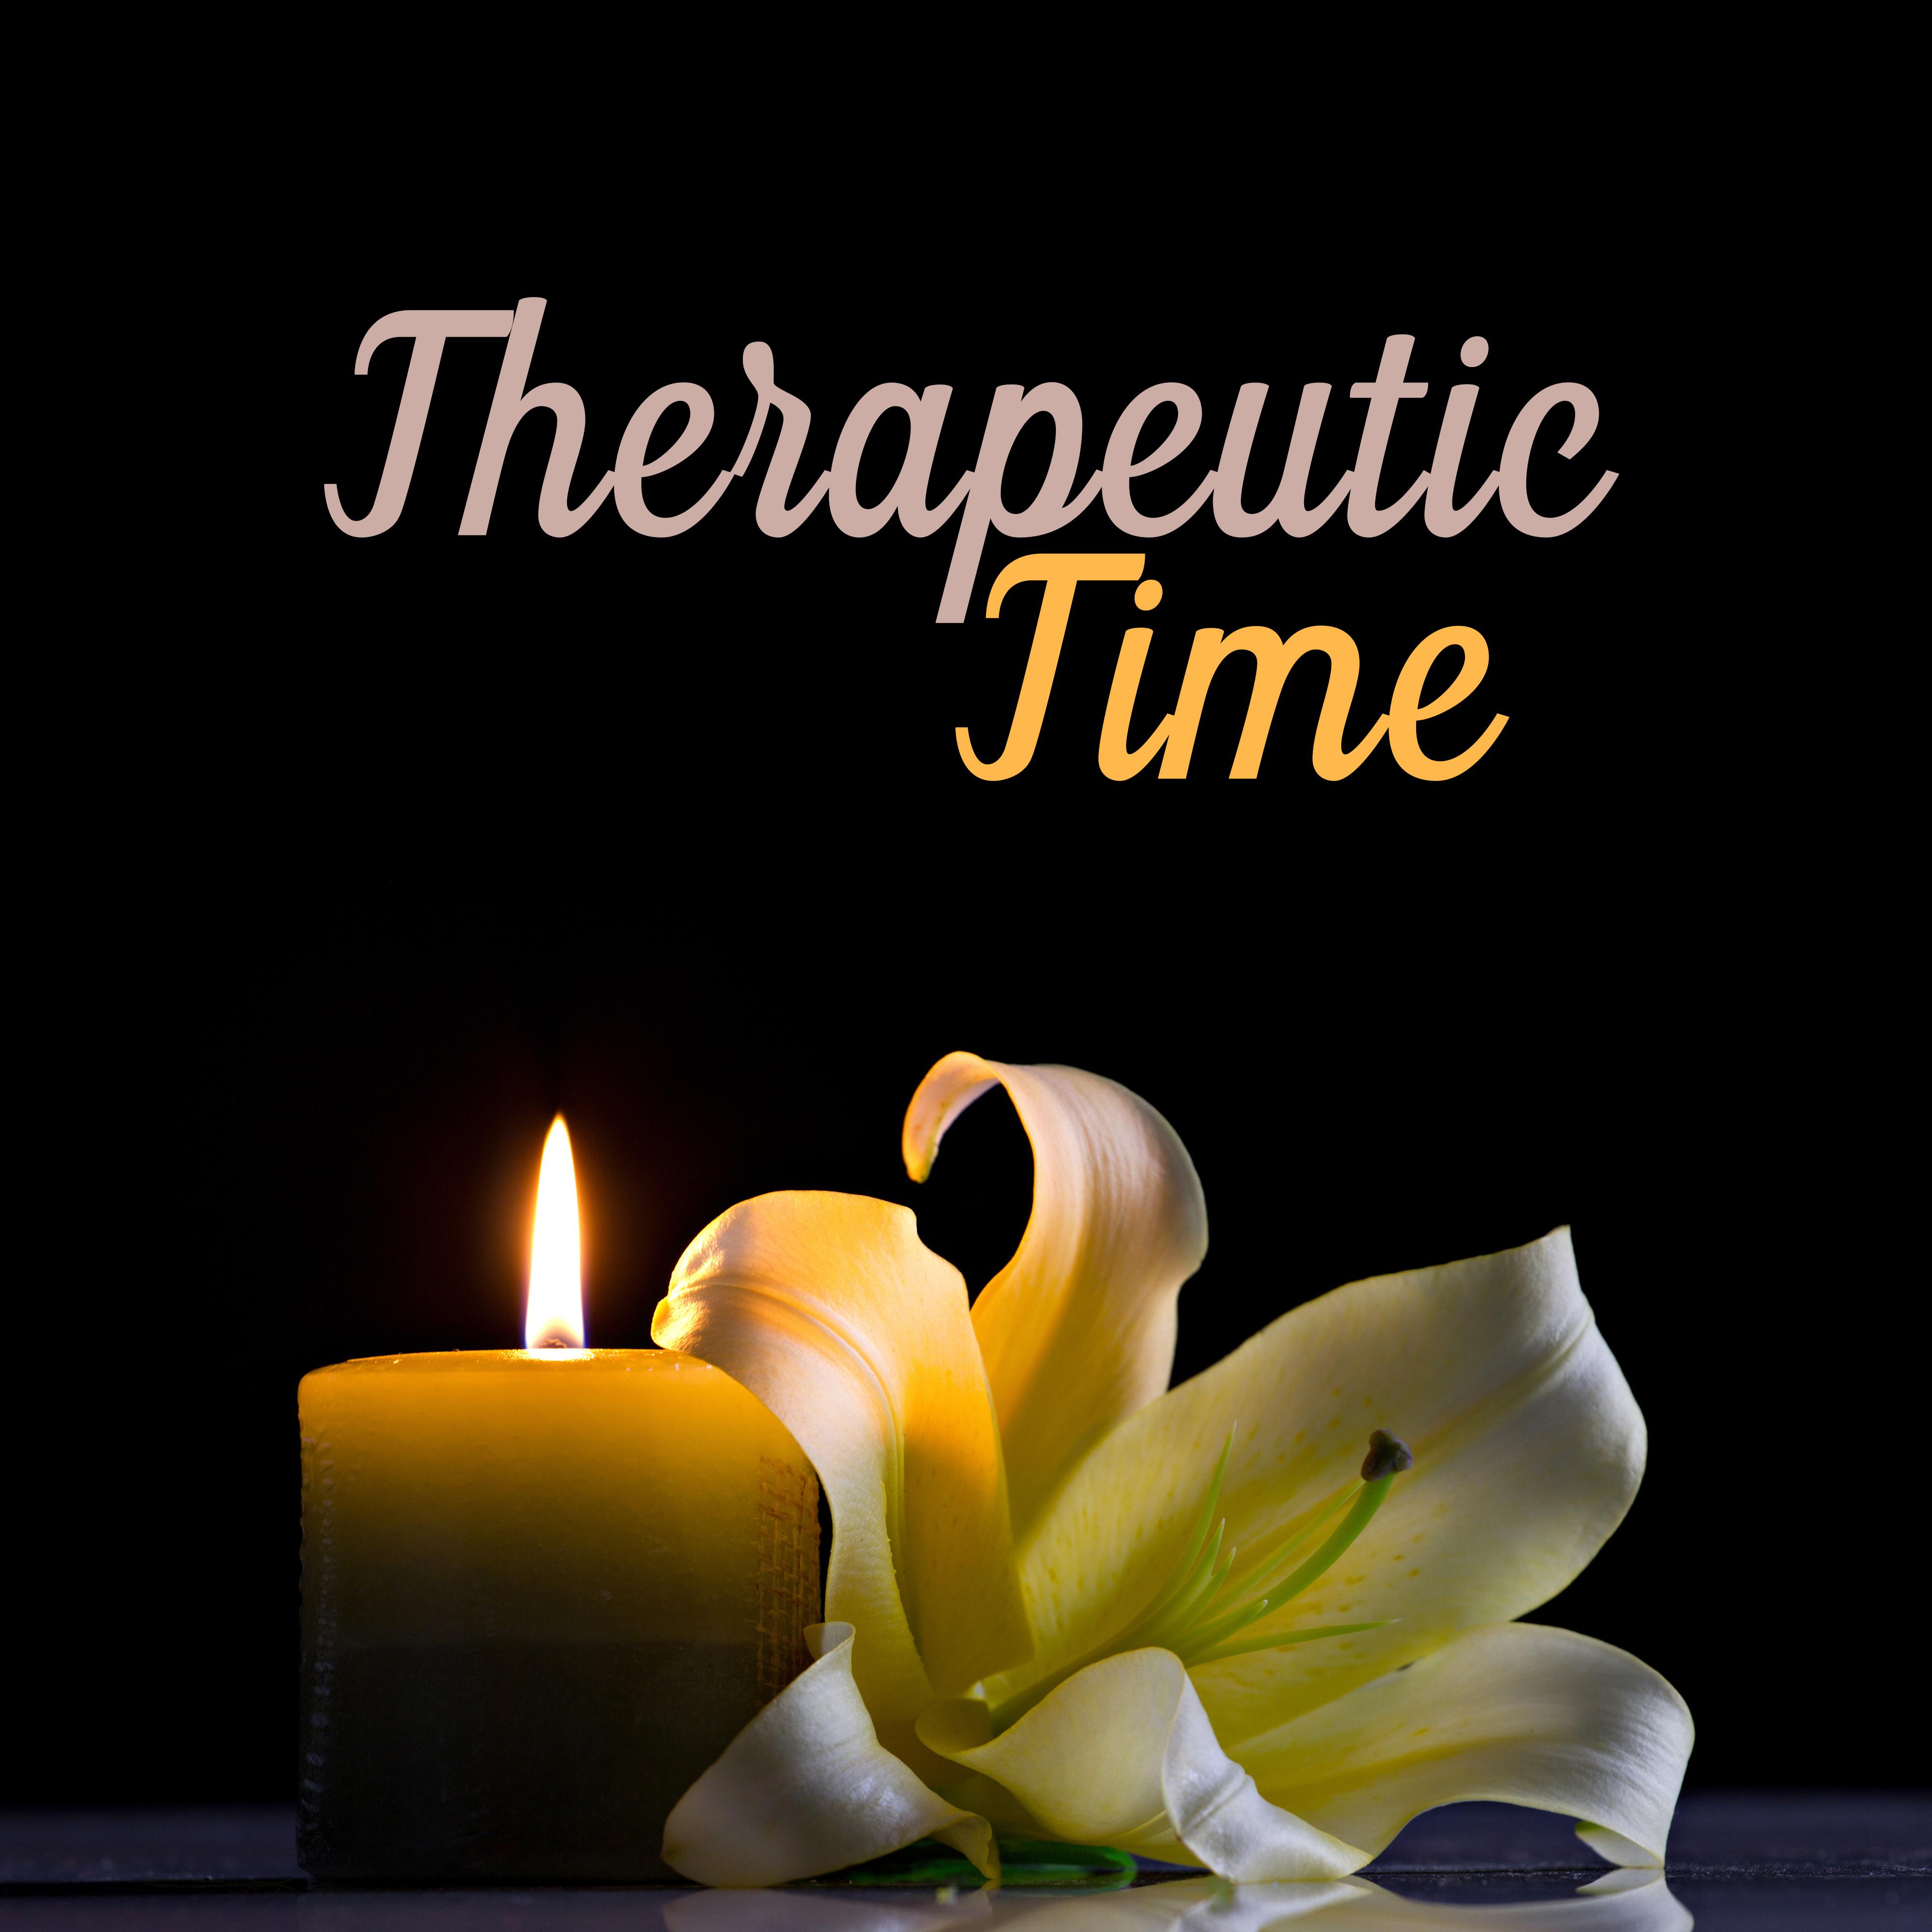 Therapeutic Time – Calming Music for Spa, Wellness, Pure Relaxation, Massage Music, Zen Spa Songs, Deep Relaxation, Therapy Spa